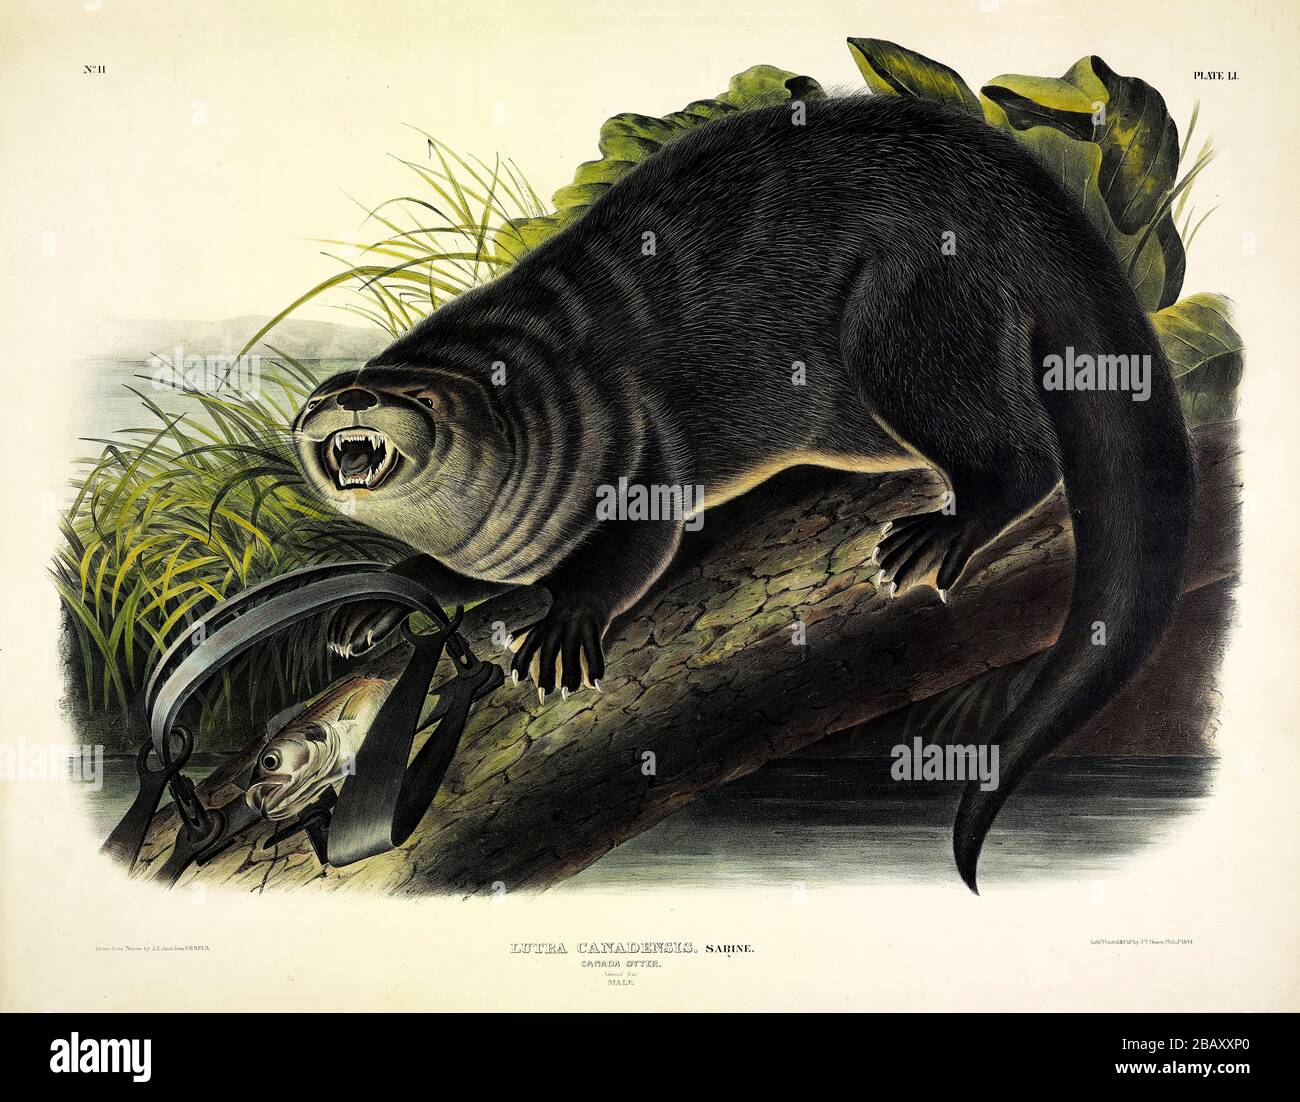 Plate 51 Canada Otter (Lutra Canadensis) from The Viviparous Quadrupeds of North America, John James Audubon, Very high resolution and quality edited Stock Photo